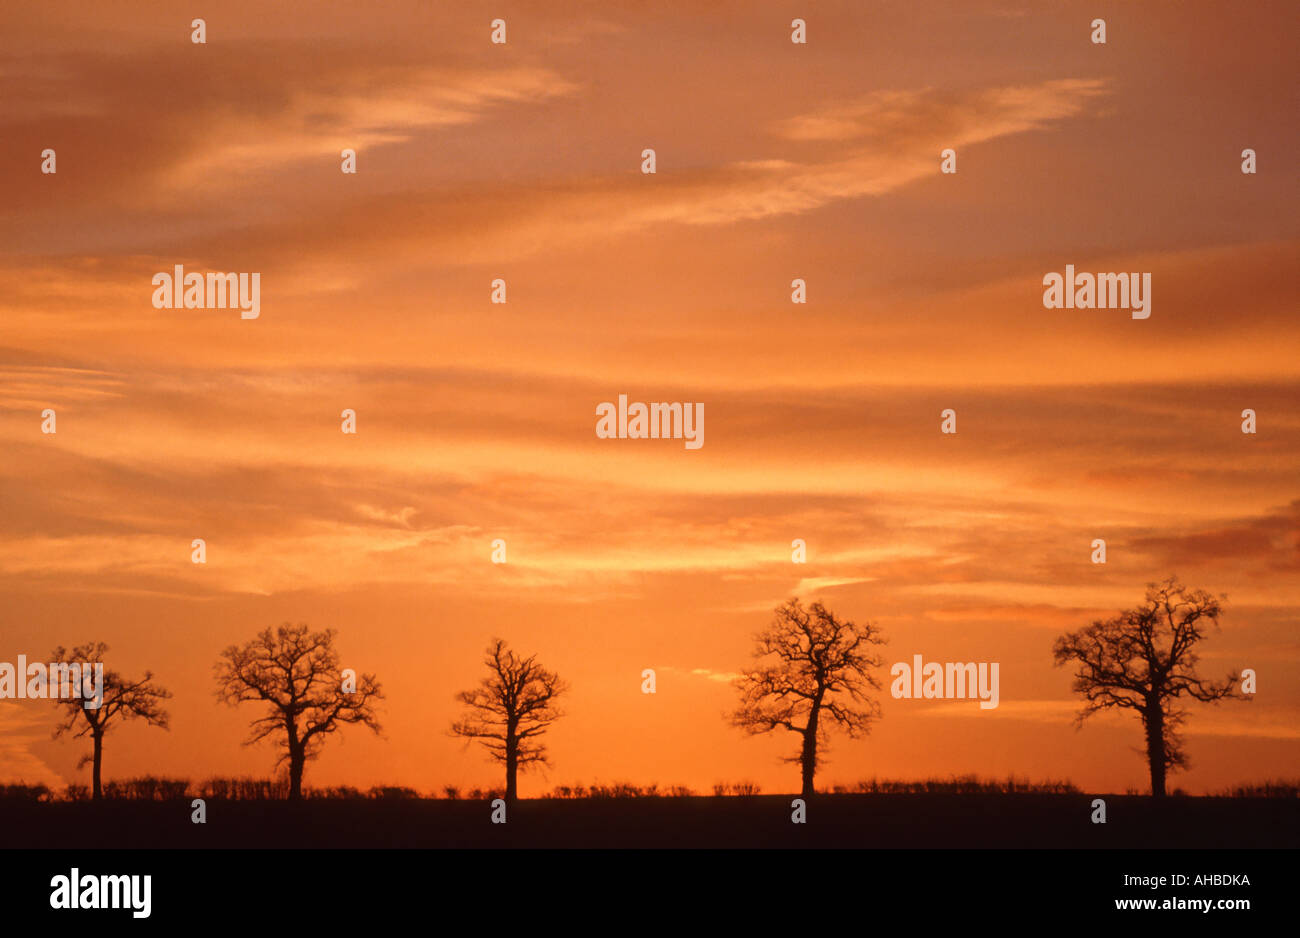 Line of 5 winter trees on hilltop silhouetted against dramatic sunset Stock Photo